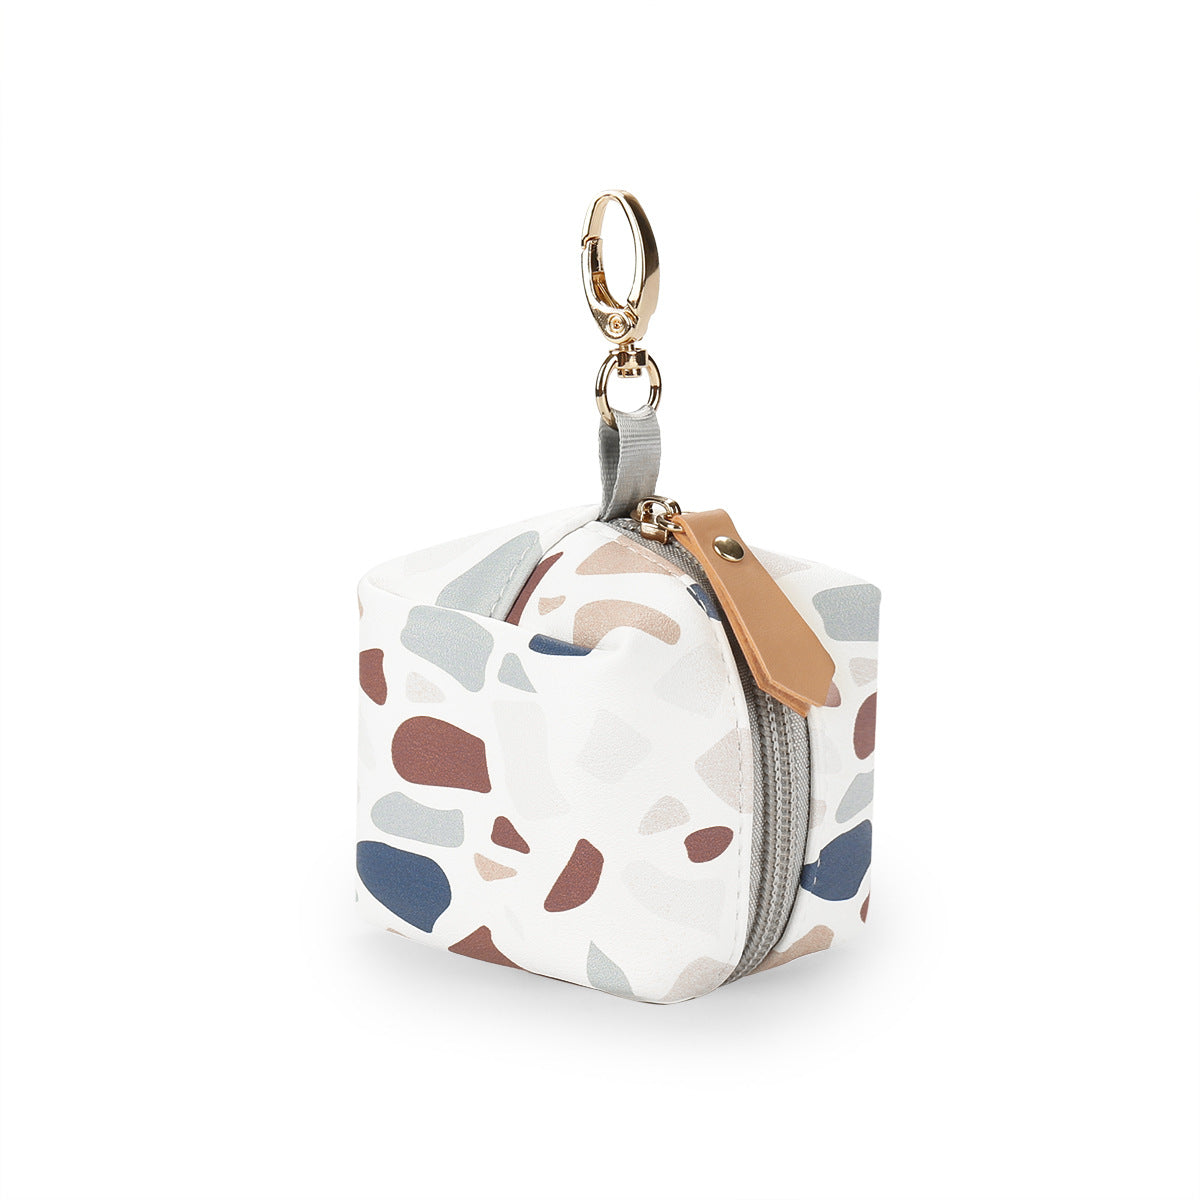 On-the-Go Pacifier Bliss: Mommy Bag Portable Pacifier Holder - Flapzi